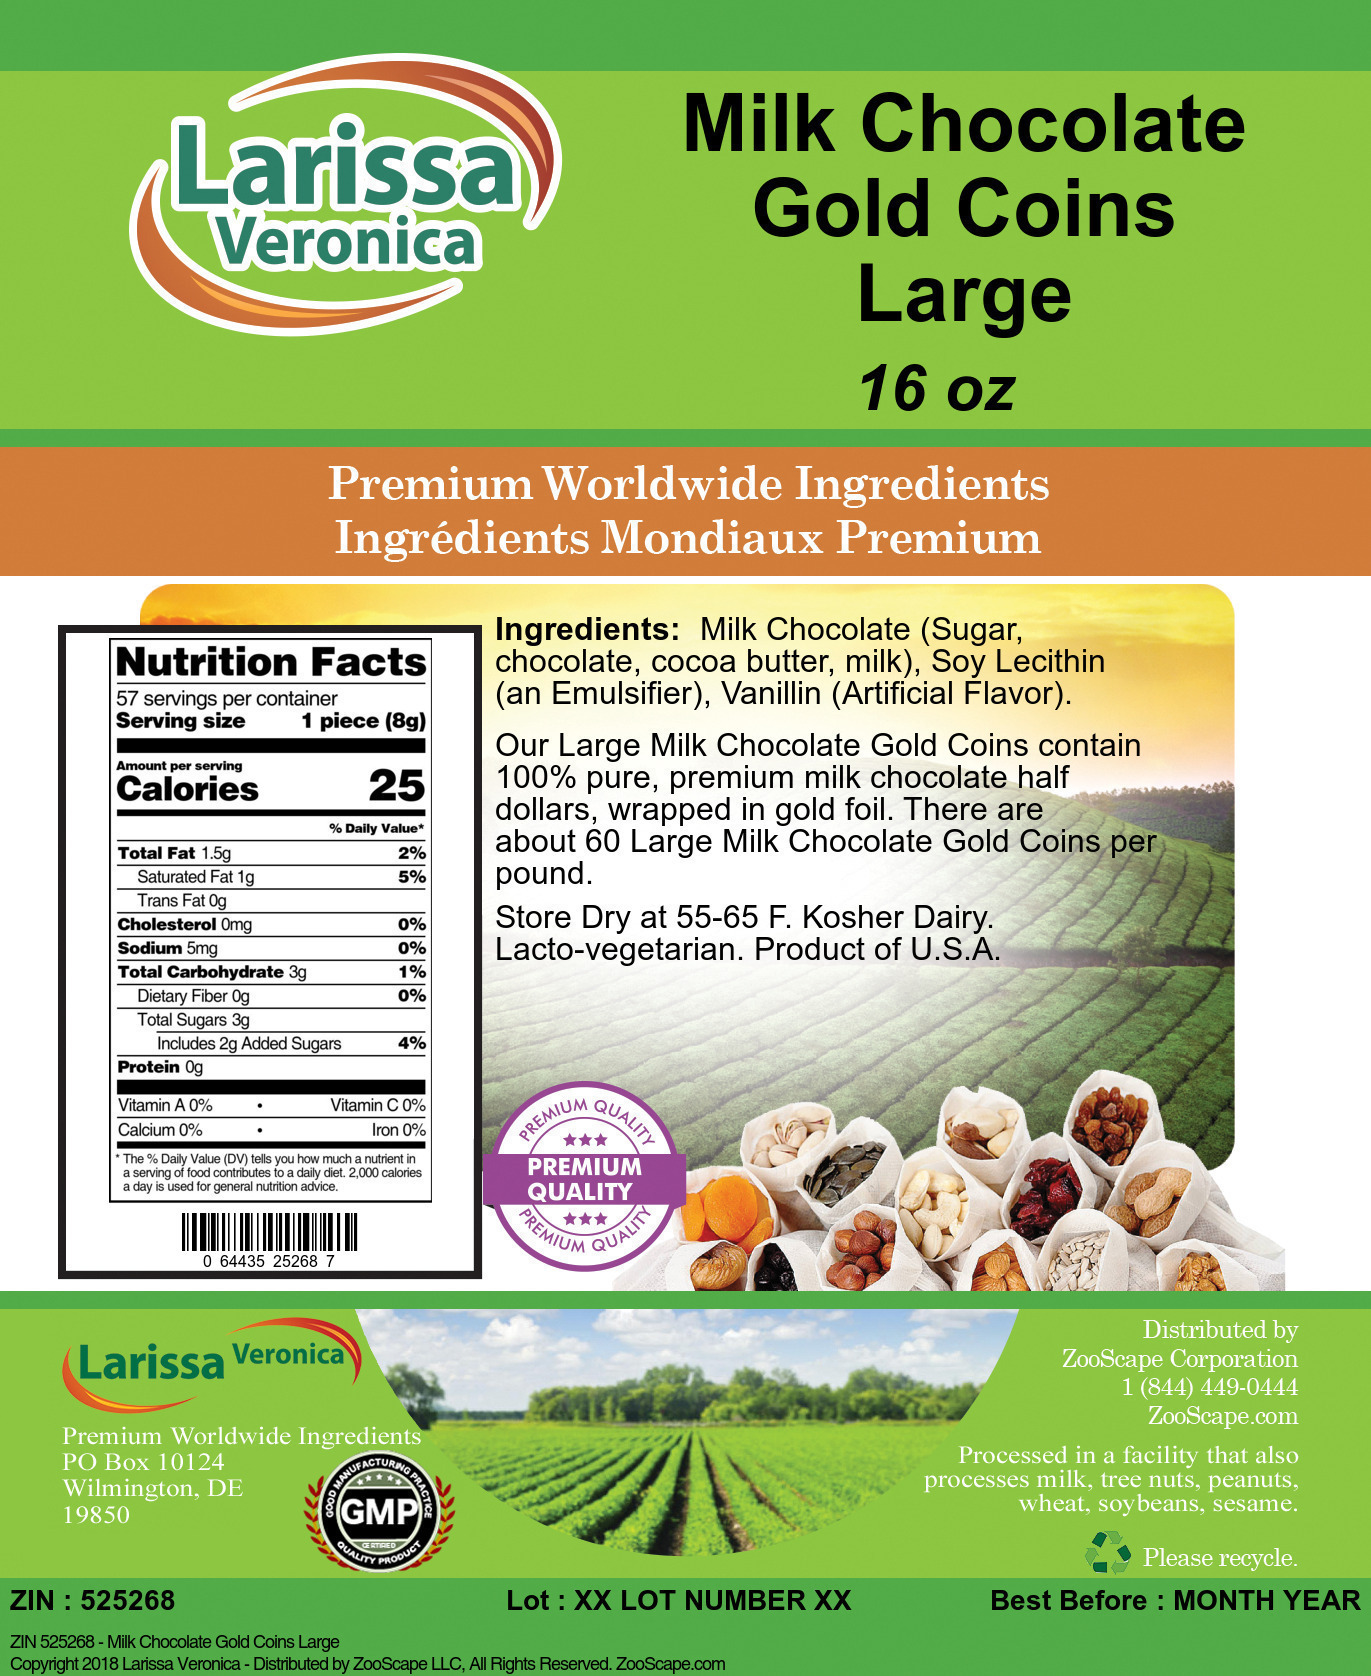 Milk Chocolate Gold Coins Large - Label